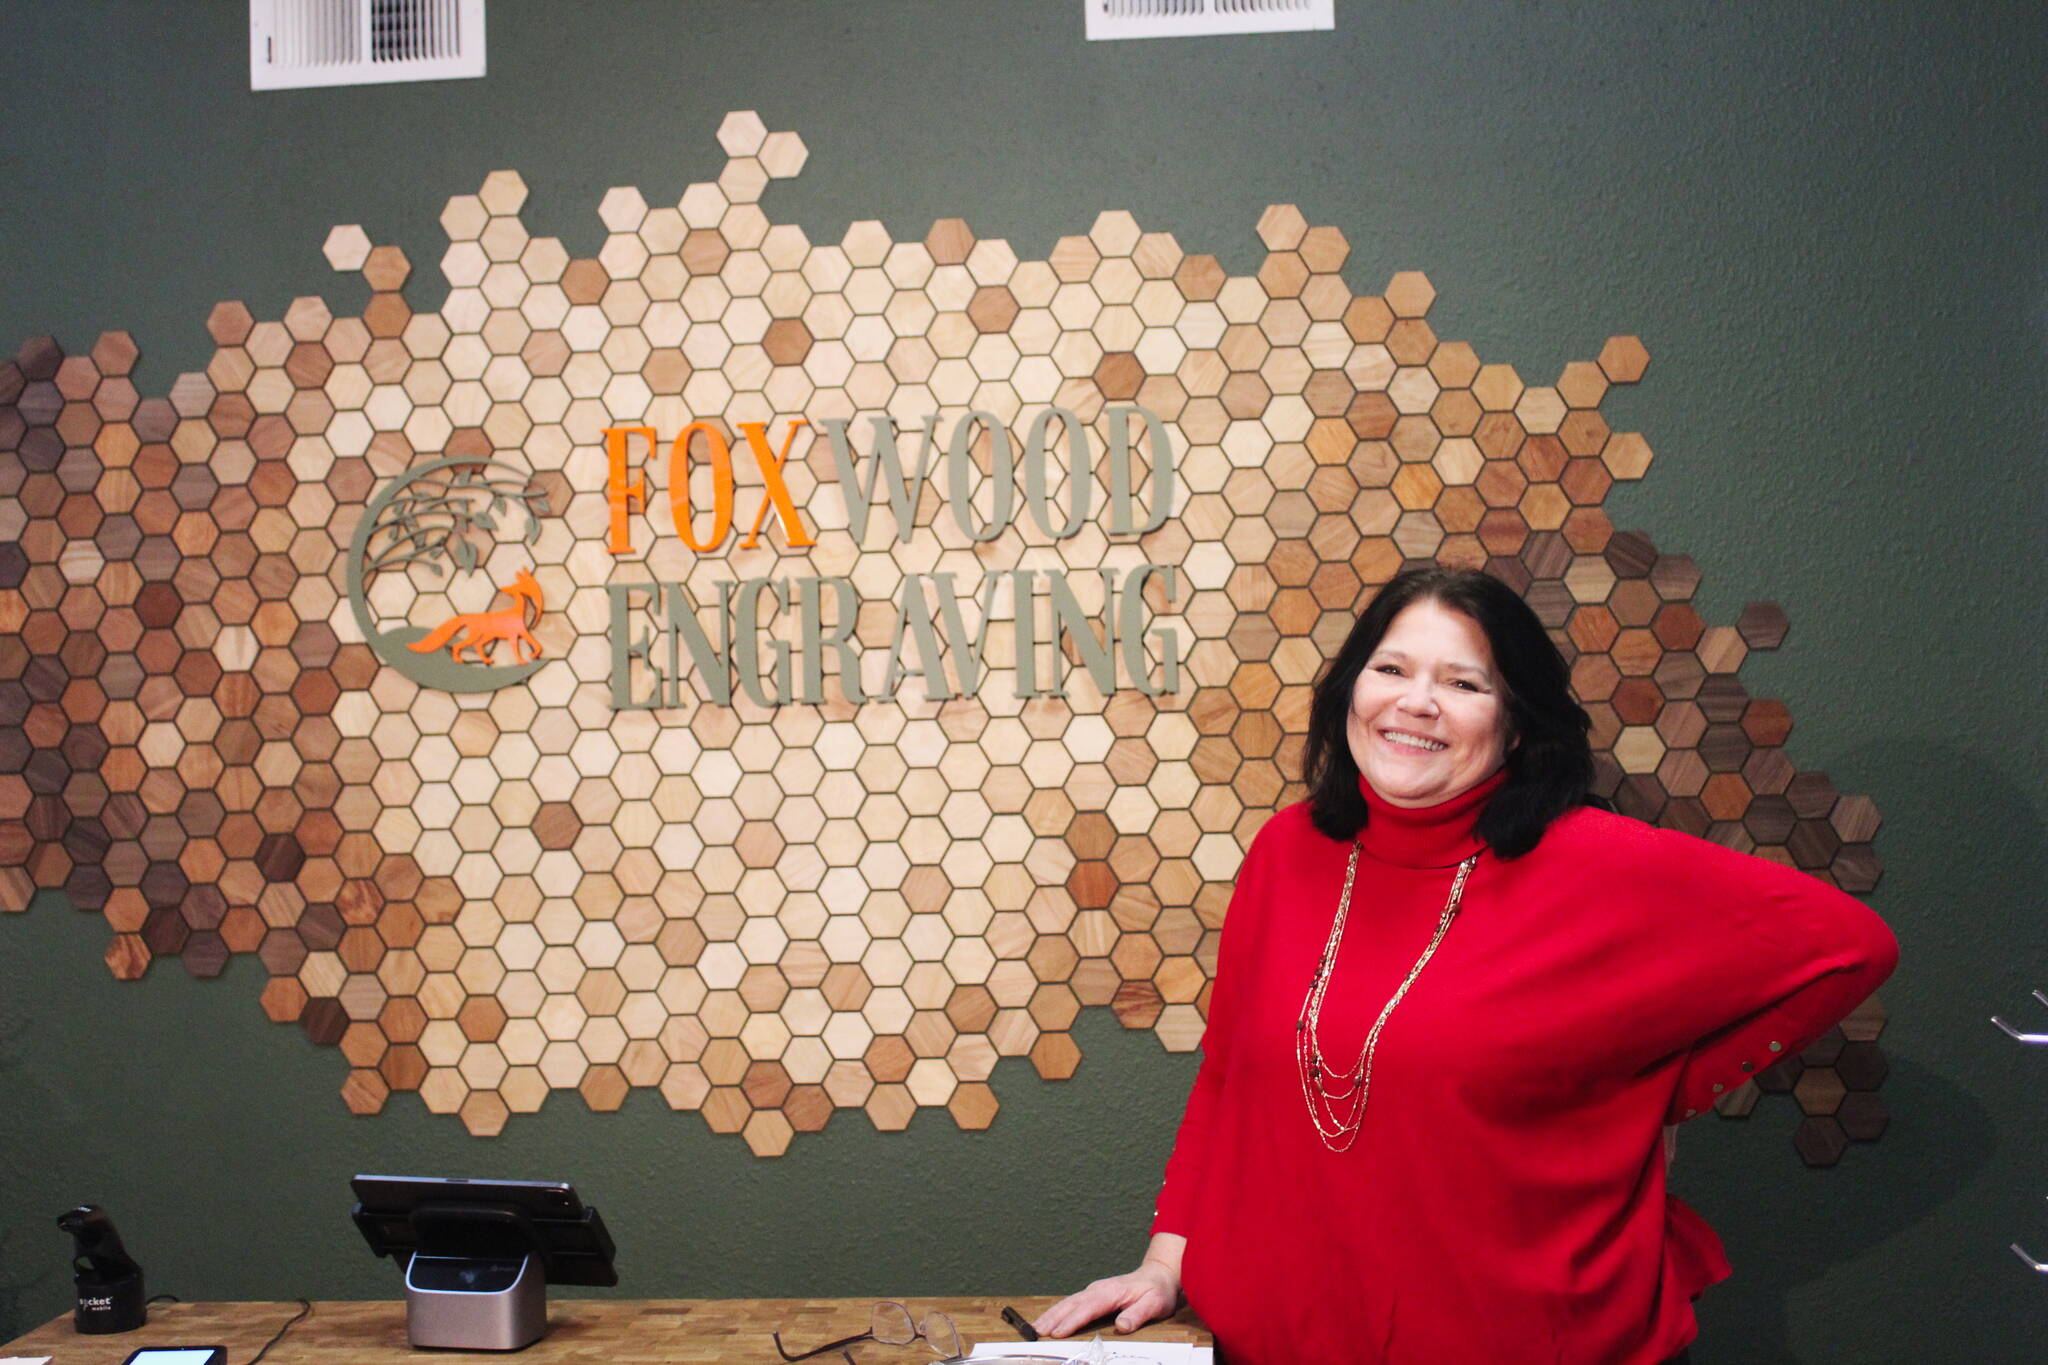 ”I fell in love with the wood,” Foxwood Engraving owner Joanna Lis said of her use of laser-cut wooden gifts and decor. Photo by Bailey Jo Josie/Sound Publishing.